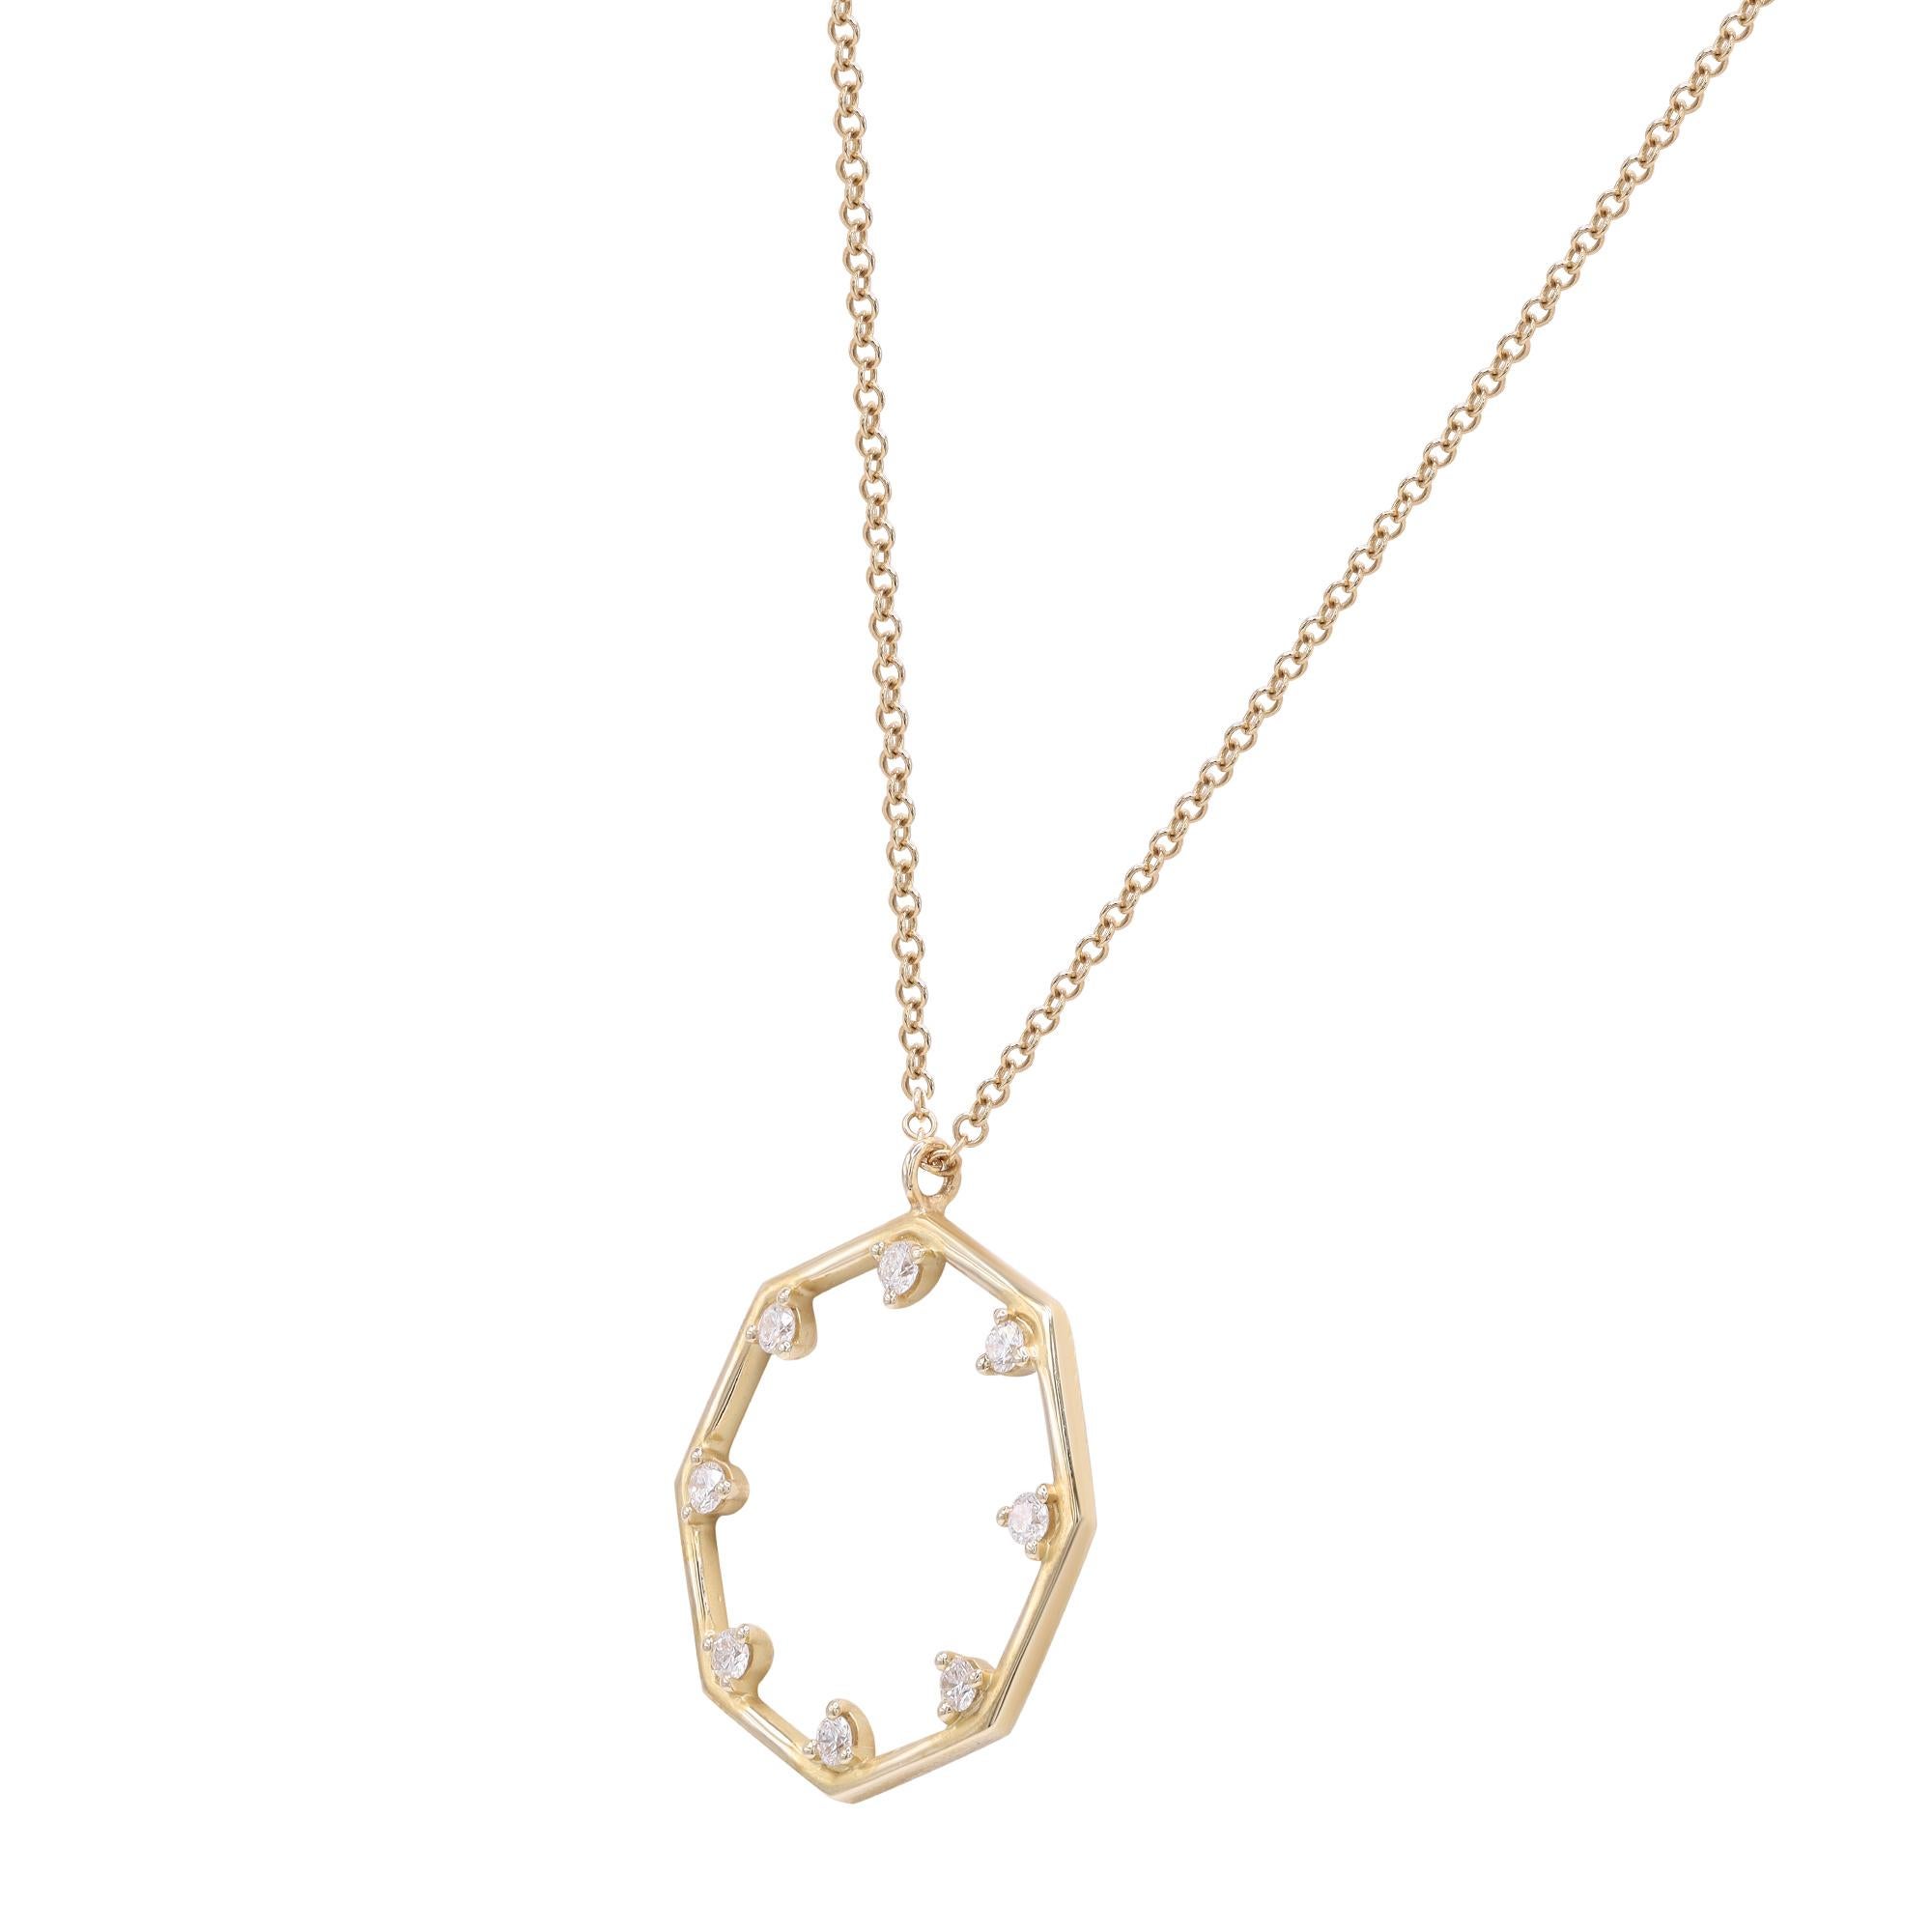 Beautiful and delicate this diamond pendant necklace will leave everyone speechless the moment they see it. Crafted in high polished 14k yellow gold. Octagon shape cut out pendant which is set with 8 brilliant round cut diamonds of G-H color and